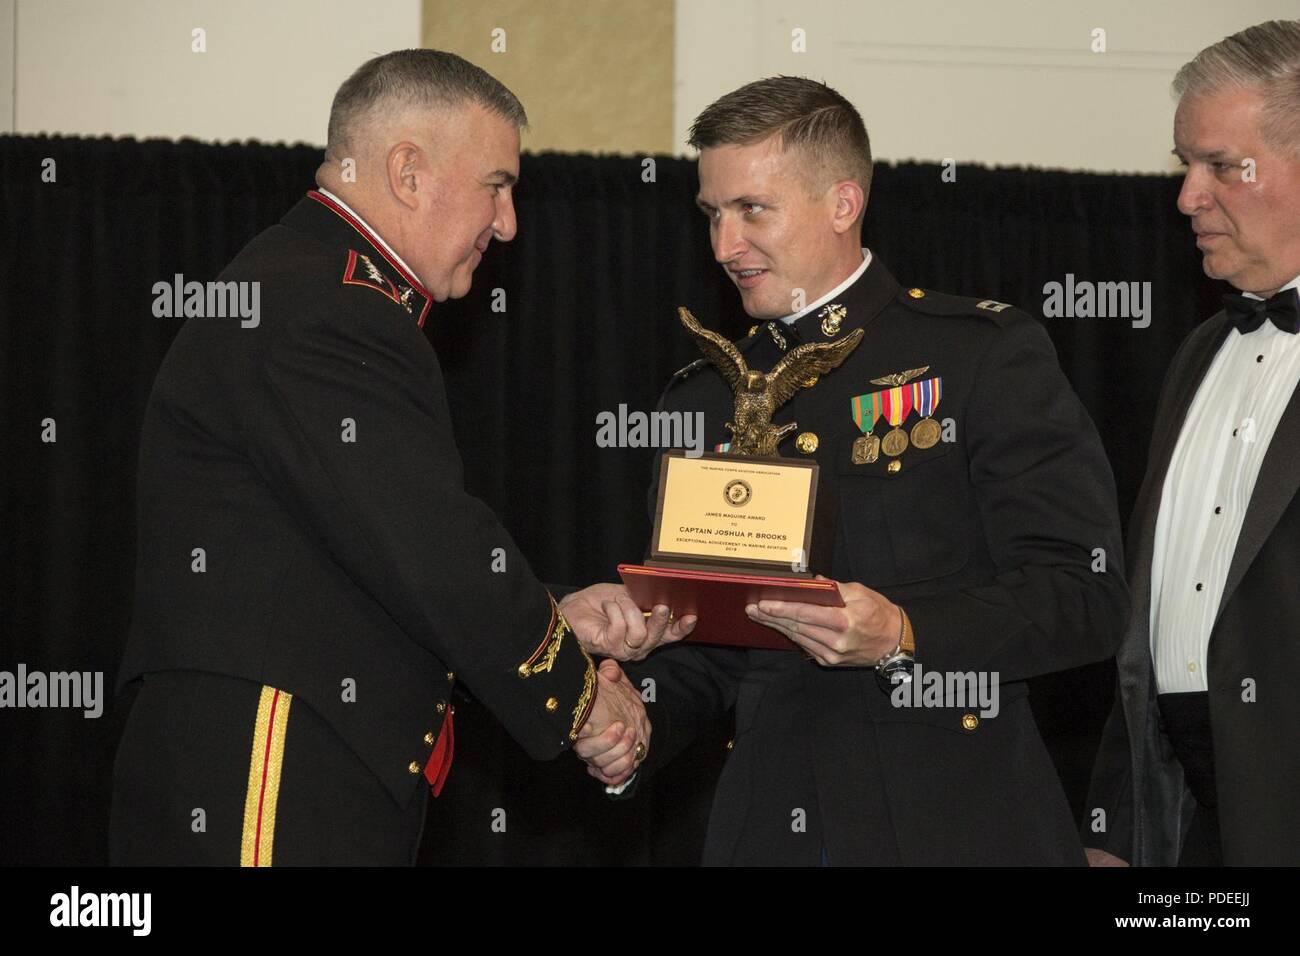 The Assistant Commandant of the Marine Corps Gen. Glenn M. Walters, left, presents the James Maguire Award for exceptional achievement in Marine Aviation to Capt. Joshua P. Brooks, ACT officer in charge, Department of Operational Safety and Standardization (DOSS), Marine Unmanned Aerial Vehicle Squadron 3 (VMU-3), Marine Aircraft Group 24 (MAG-24), during the 47th annual Marine Corps Aviation Association (MCAA) Symposium and Awards Banquet, San Diego, Calif., May 18, 2018. Walters was the guest speaker for the event and presented 13 unit awards and 16 individual awards during the ceremony. Stock Photo